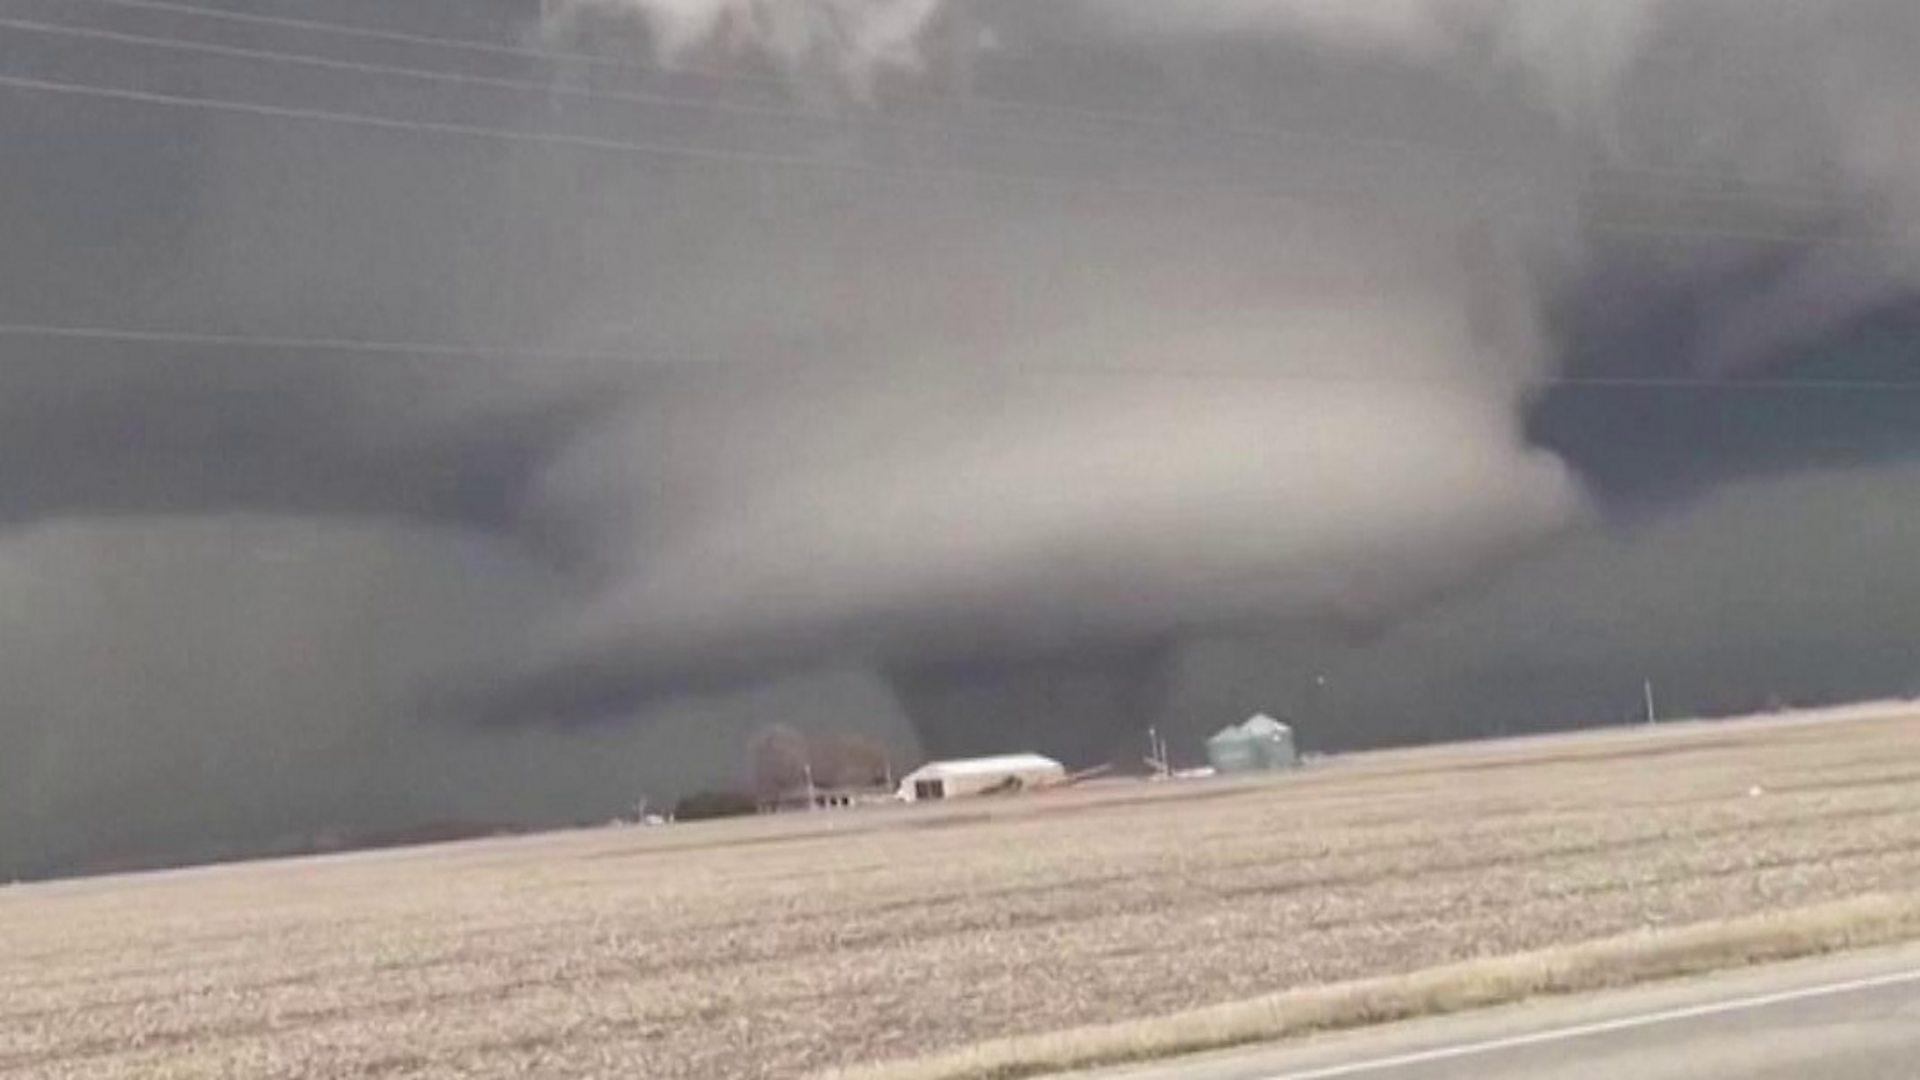 Eyewitness captures two tornadoes from car